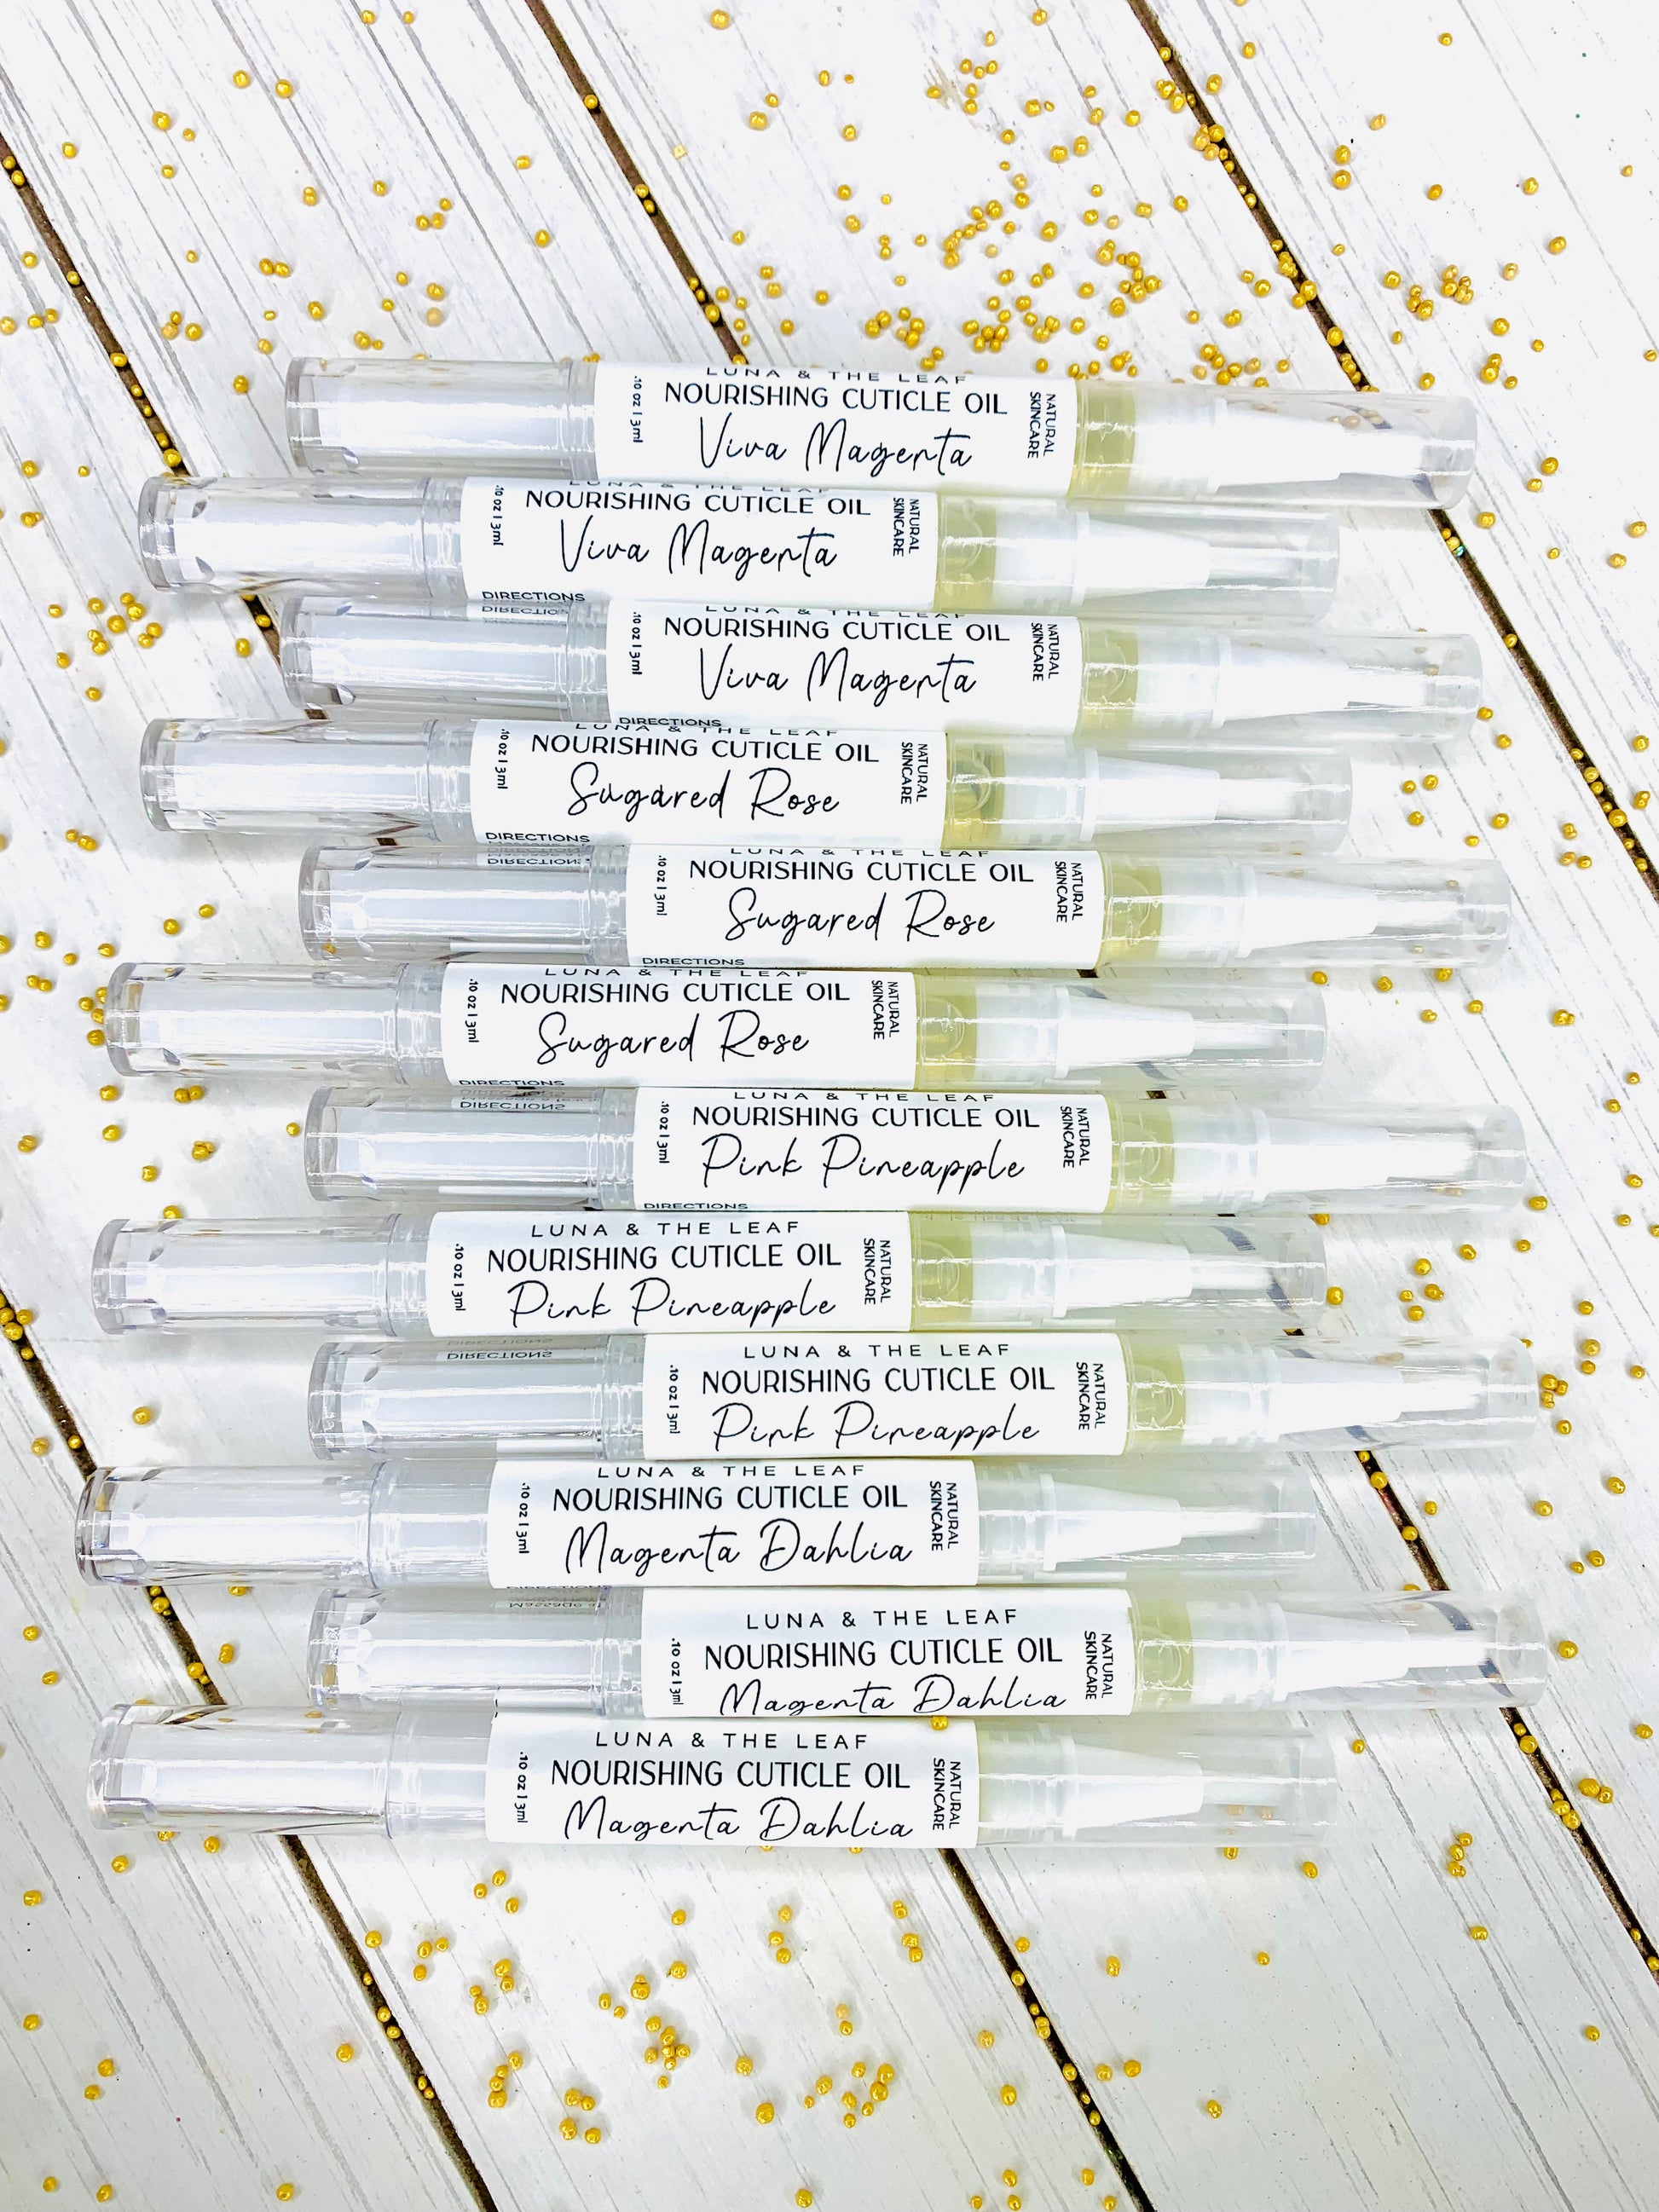 12 plastic filled cuticle oil pens laying horizontally on a white wood background. Small gold beads are scattered around the cuticle oil pens. The pens are labeled, the label reads Luna & The Leaf nourishing cuticle oil, natural skincare, .10 oz, 3 ml.